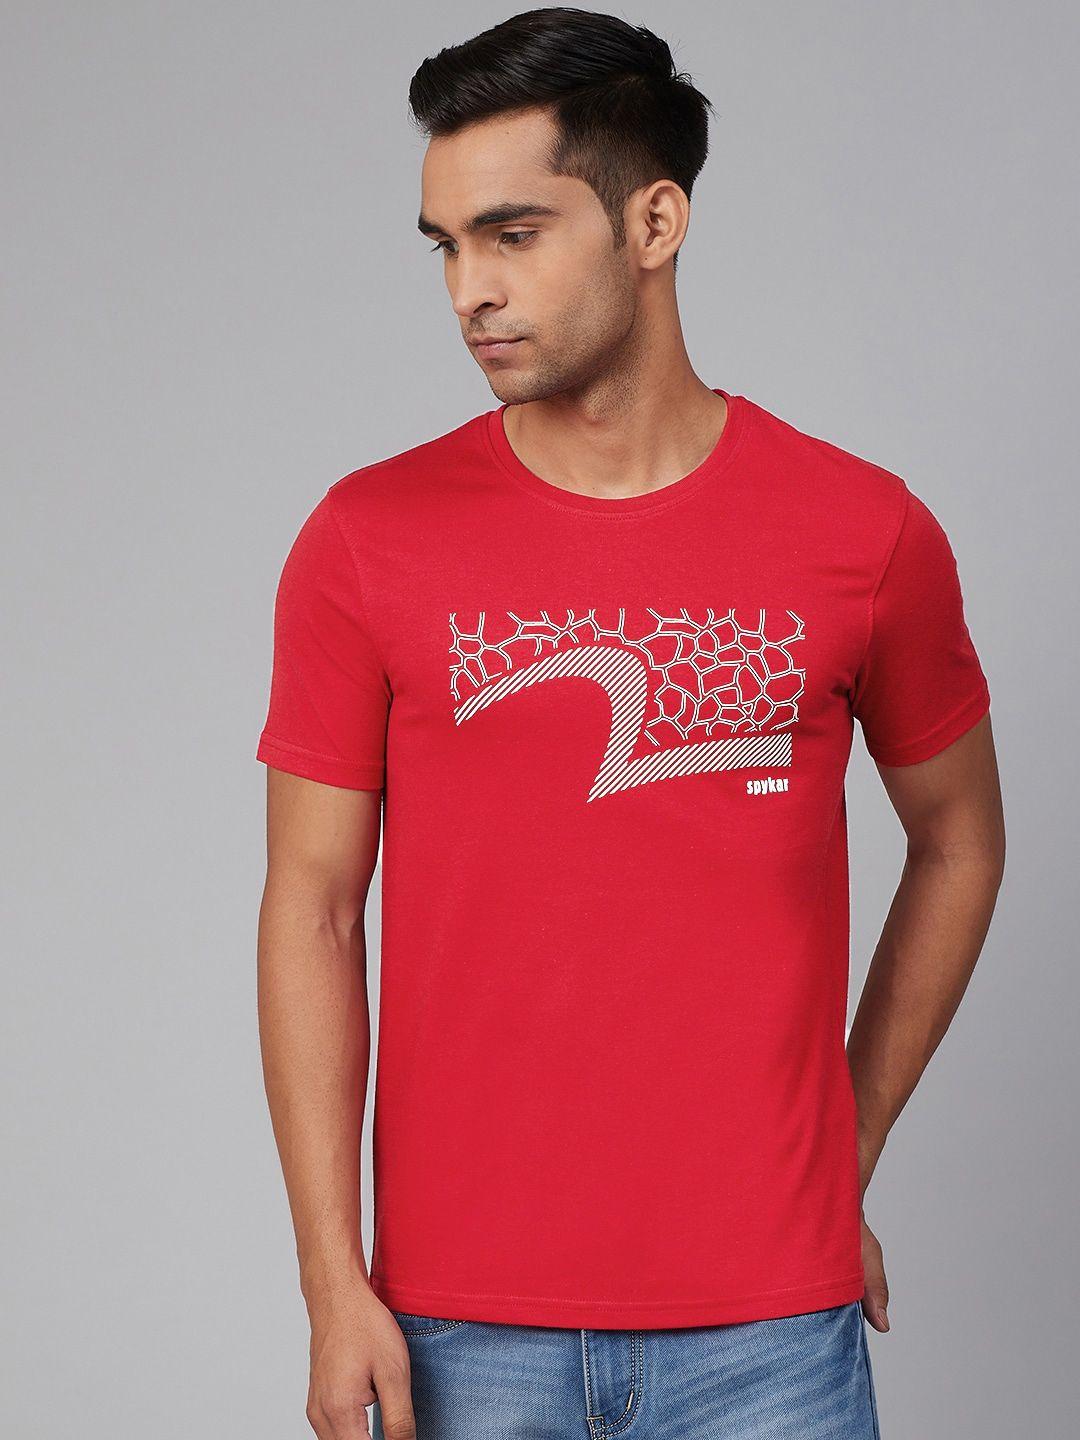 underjeans by spykar men red & white printed round neck t-shirt